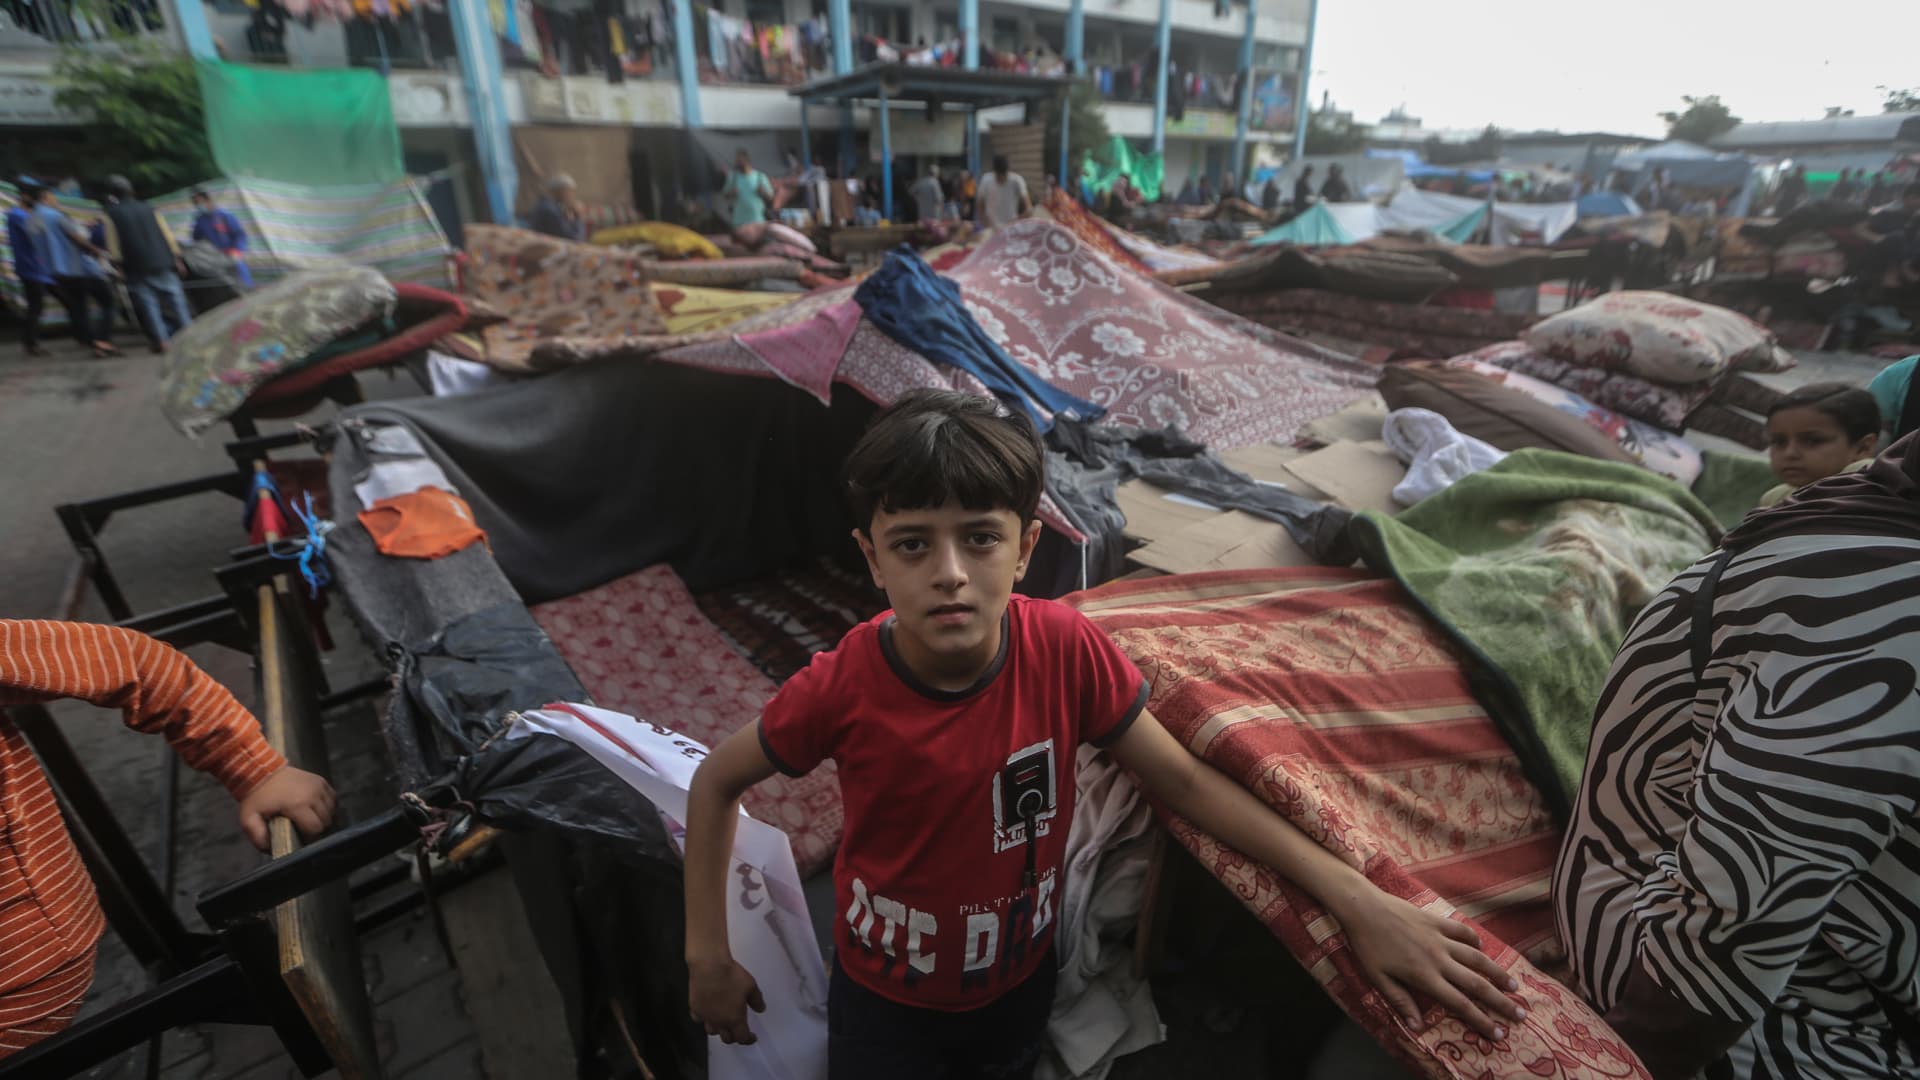 Palestinians take shelter in a school run by the United Nations Relief and Works Agency for Palestine Refugees in the Near East (UNRWA) as fighting continues between the Palestinian militant group Hamas and Israel.